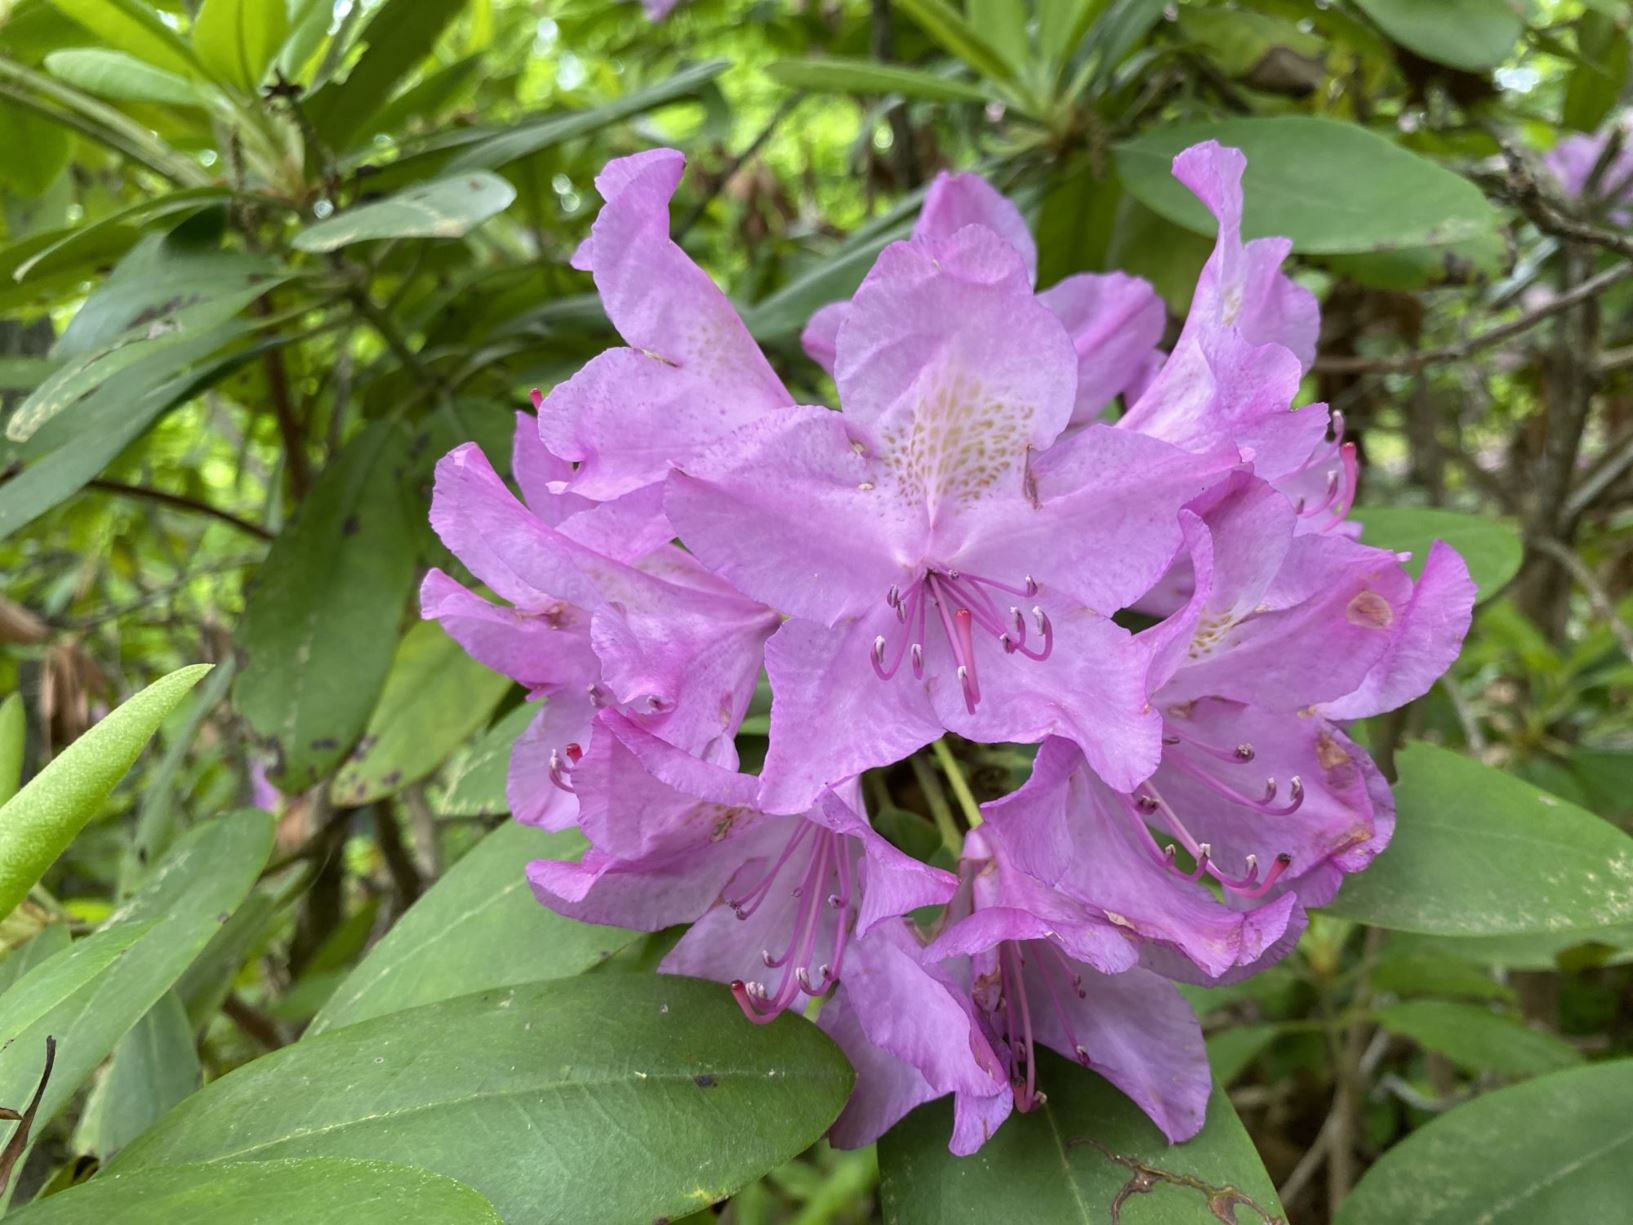 Rhododendron catawbiense 'Boursault' - Catawba rhododendron